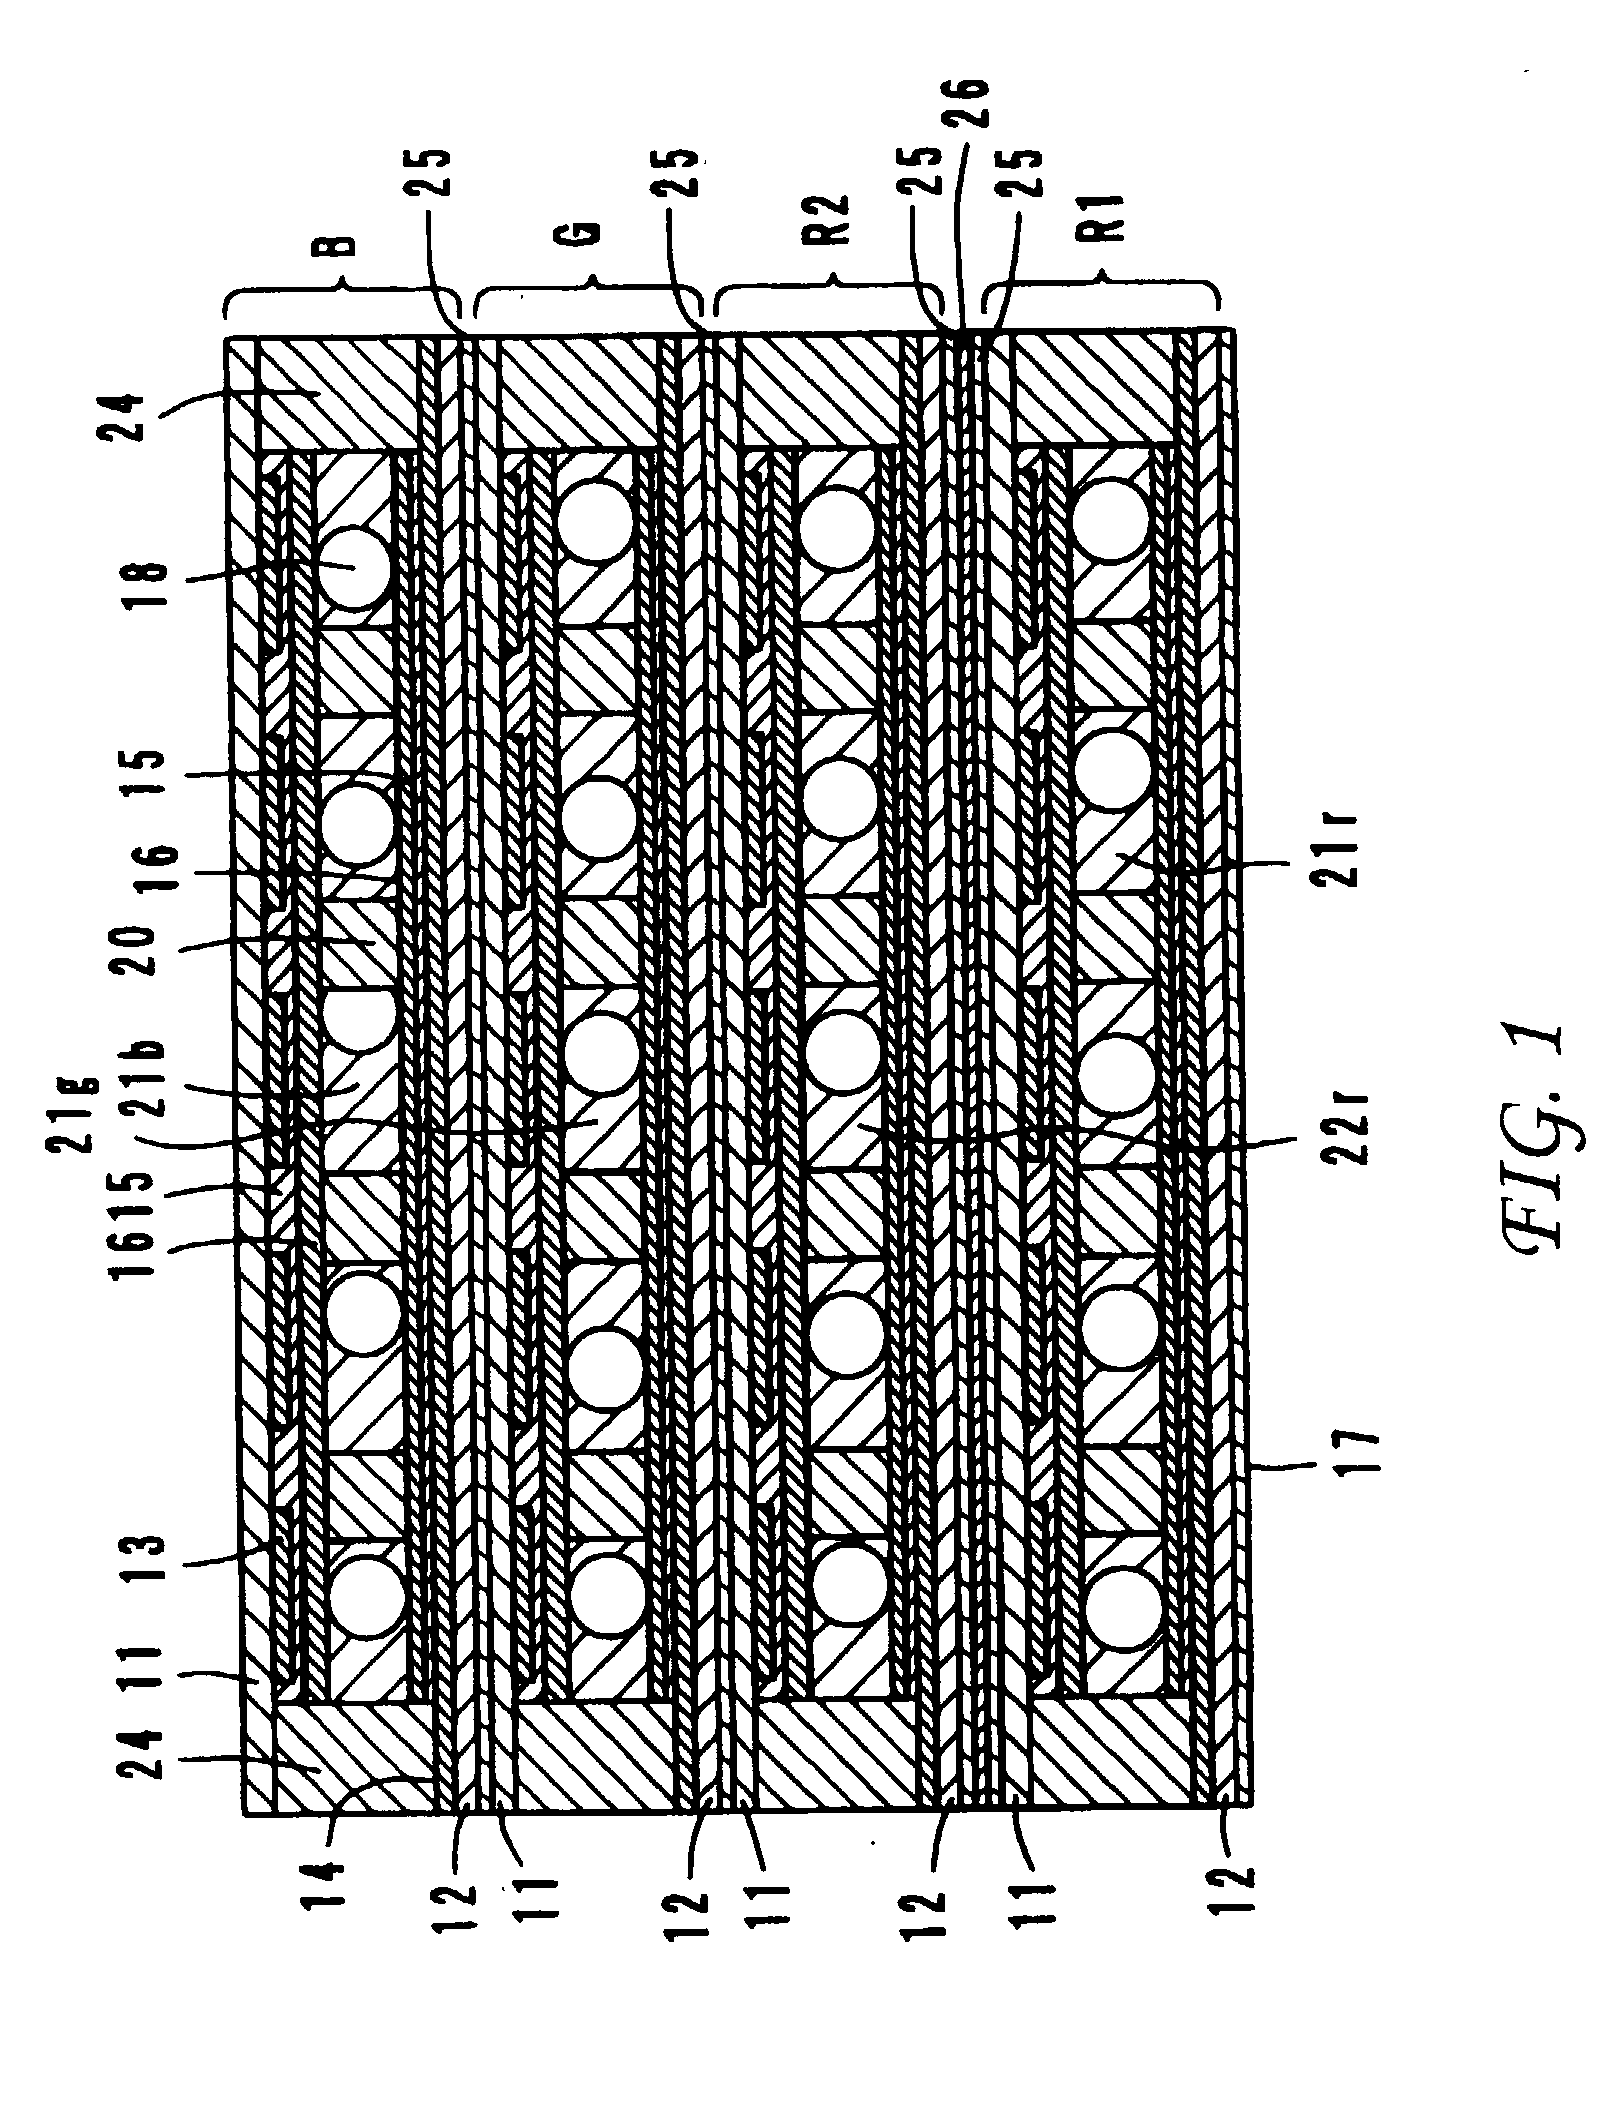 Layered type reflective full-color liquid crystal display element and display device having the element